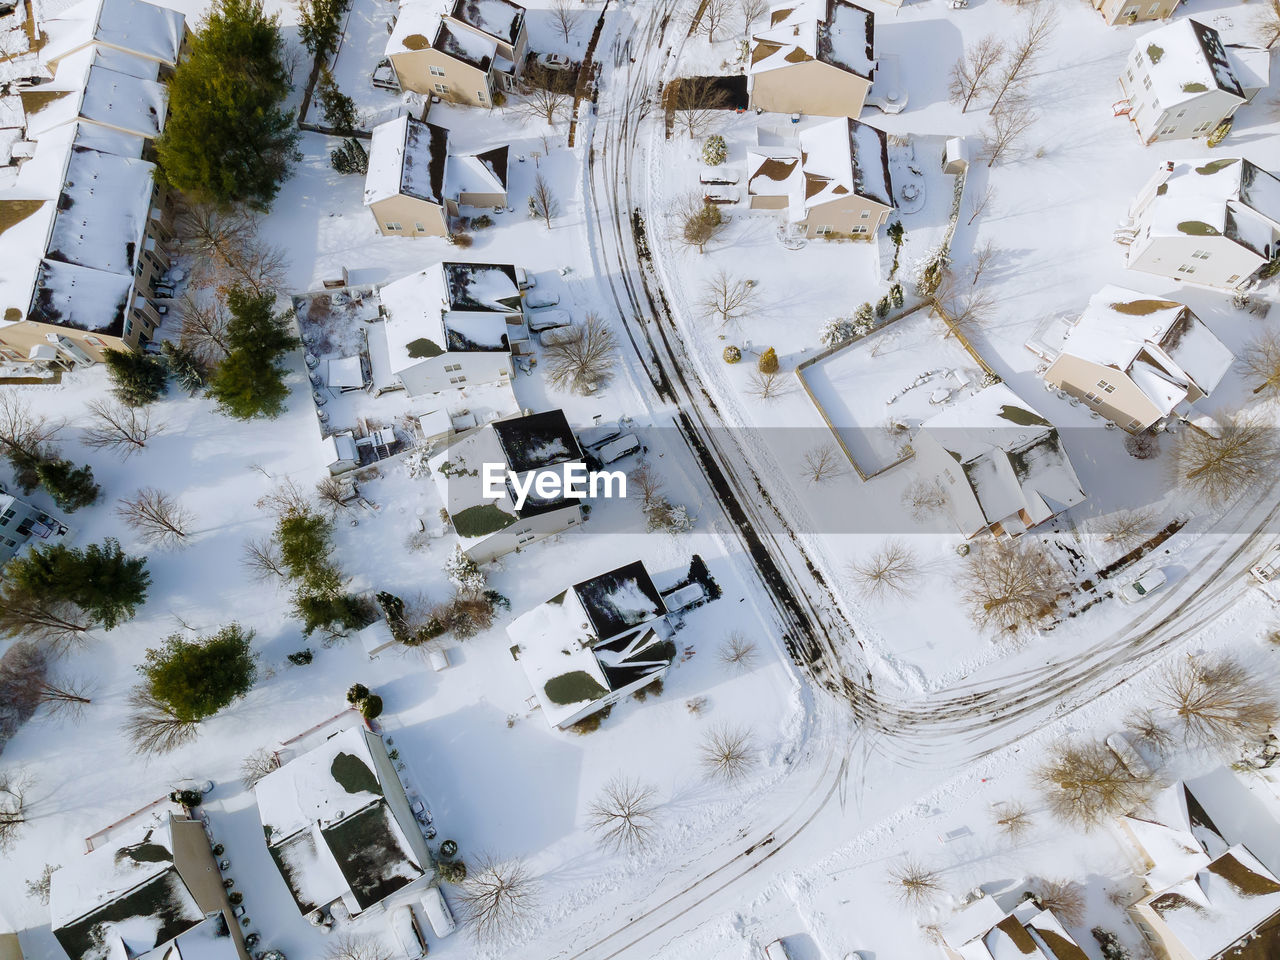 HIGH ANGLE VIEW OF SNOW COVERED BUILDING